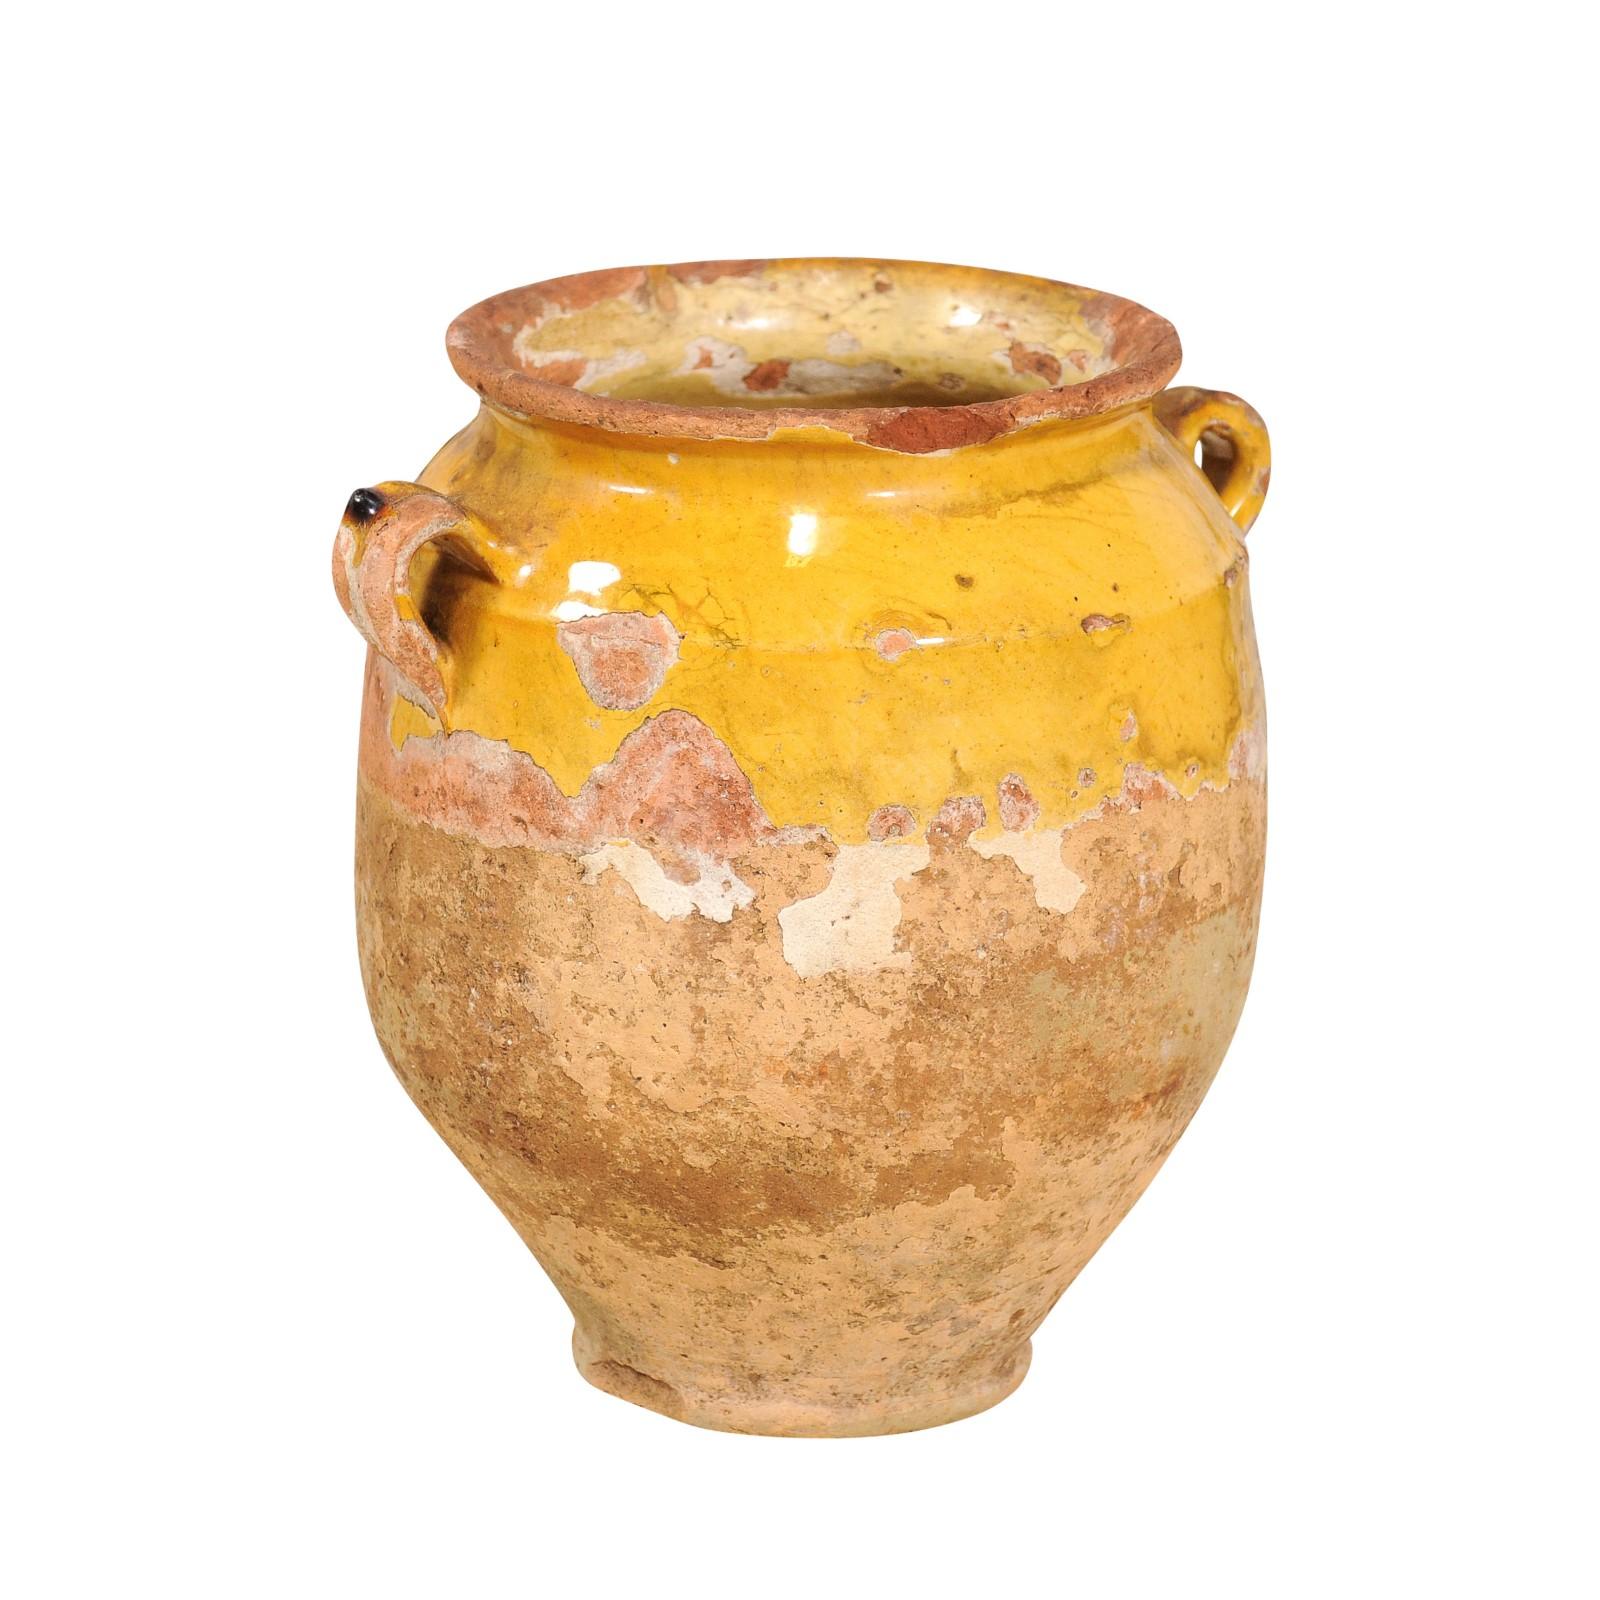 A rustic French Provincial pot à confit from the 19th century with yellow glaze and double handles. Immerse yourself in the charm of rural France with this rustic French Provincial pot à confit from the 19th century, a piece that beautifully marries